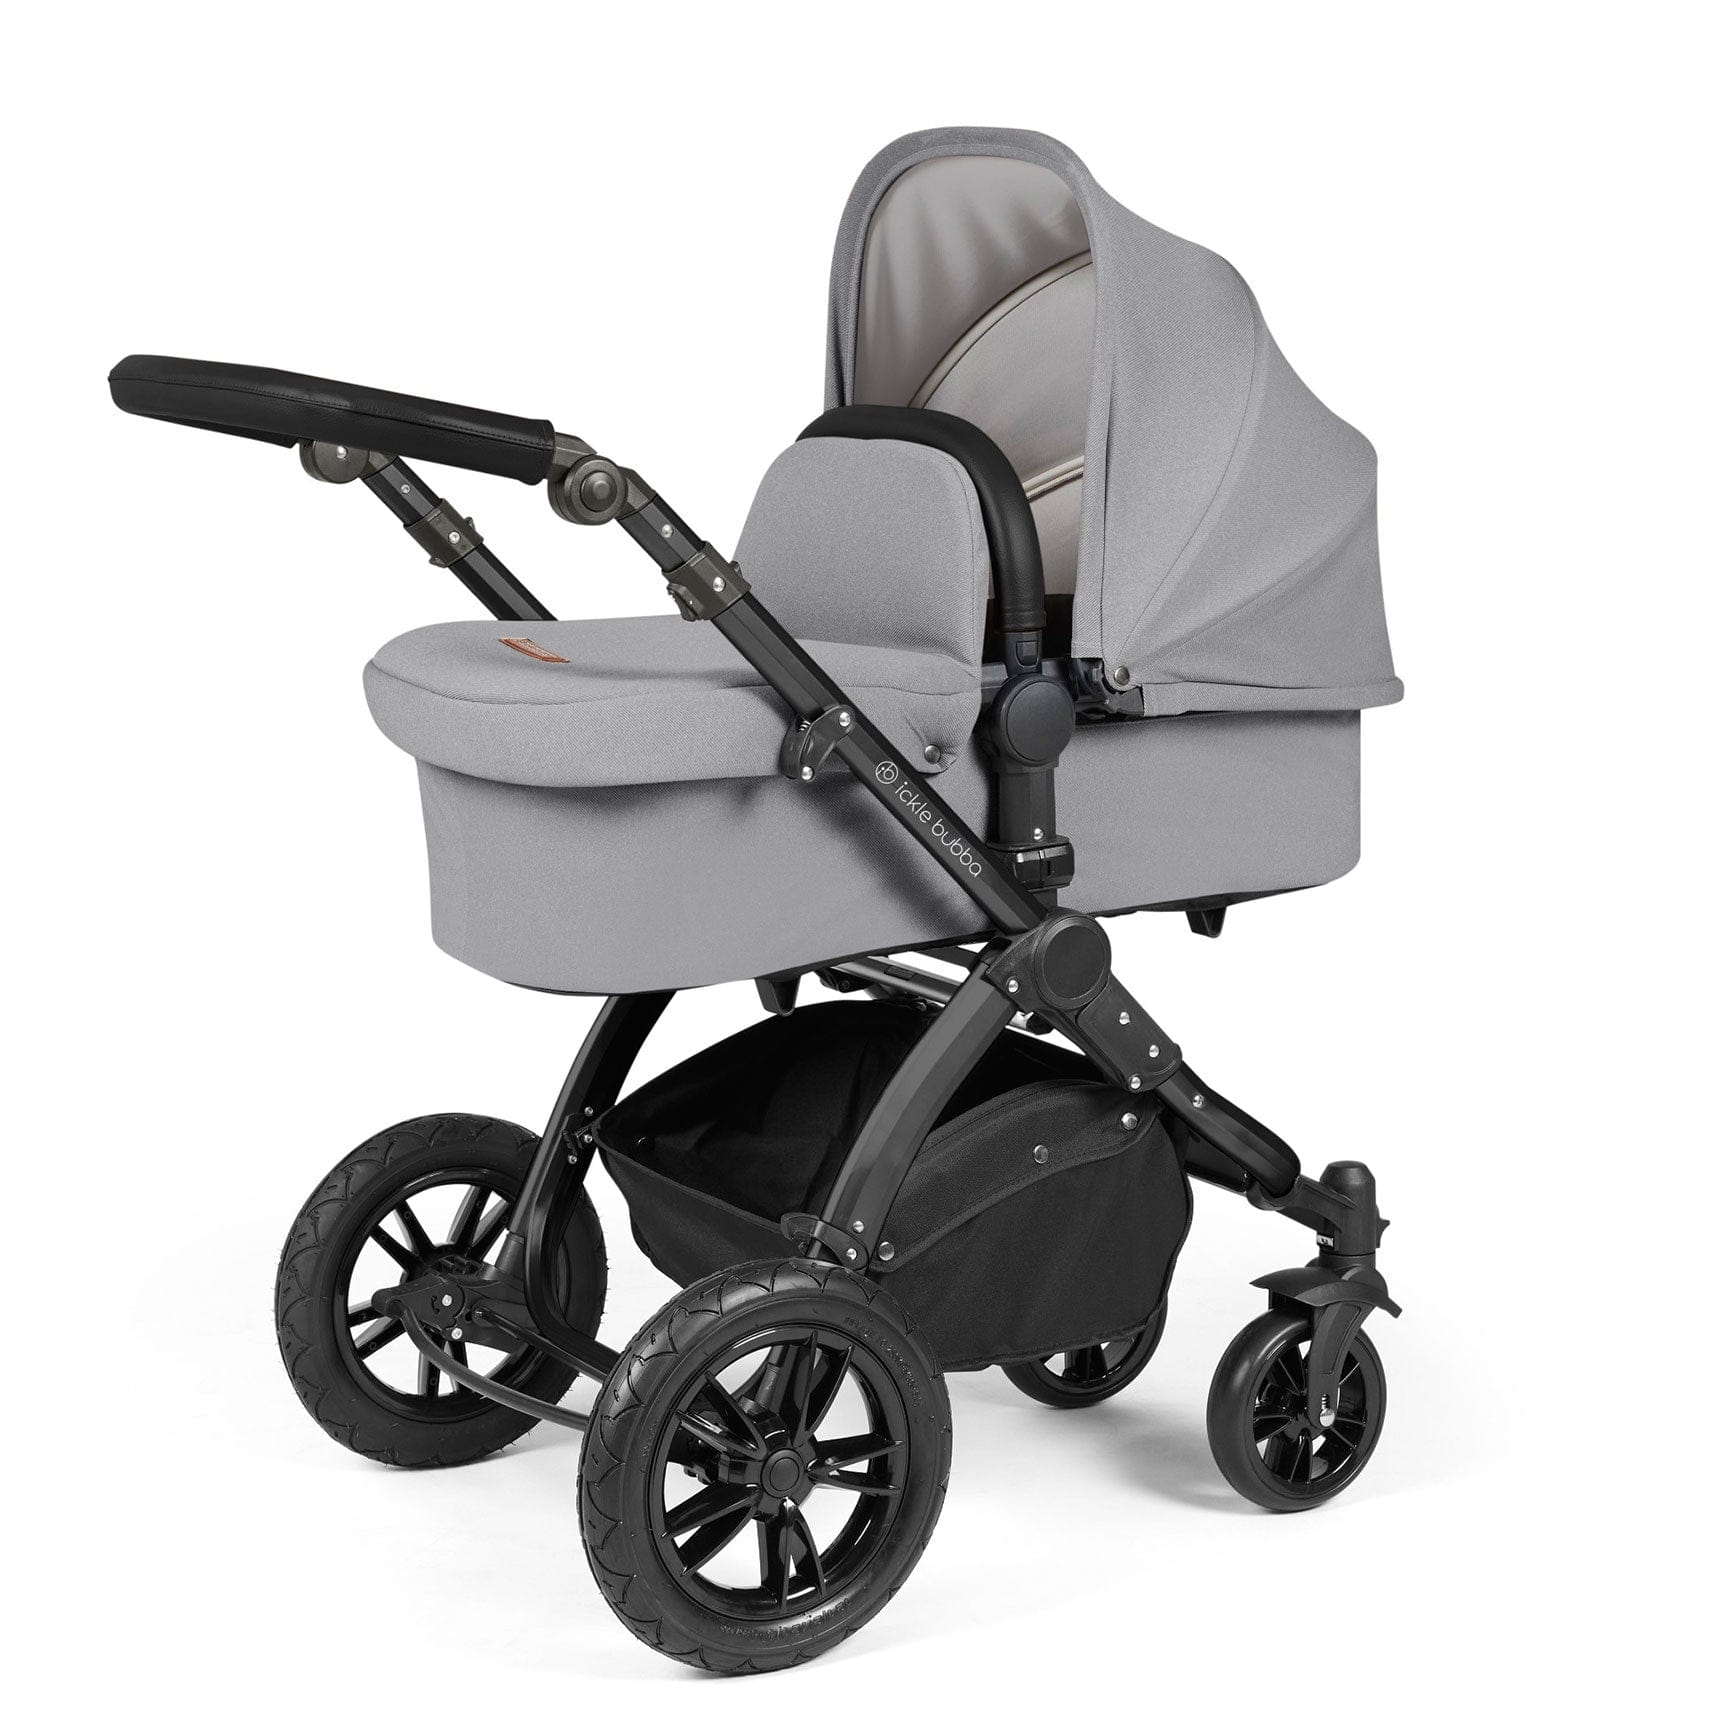 Ickle Bubba travel systems Ickle Bubba Stomp Luxe 2 in 1 Plus Pushchair & Carrycot - Black/Pearl Grey/Black 10-003-001-210